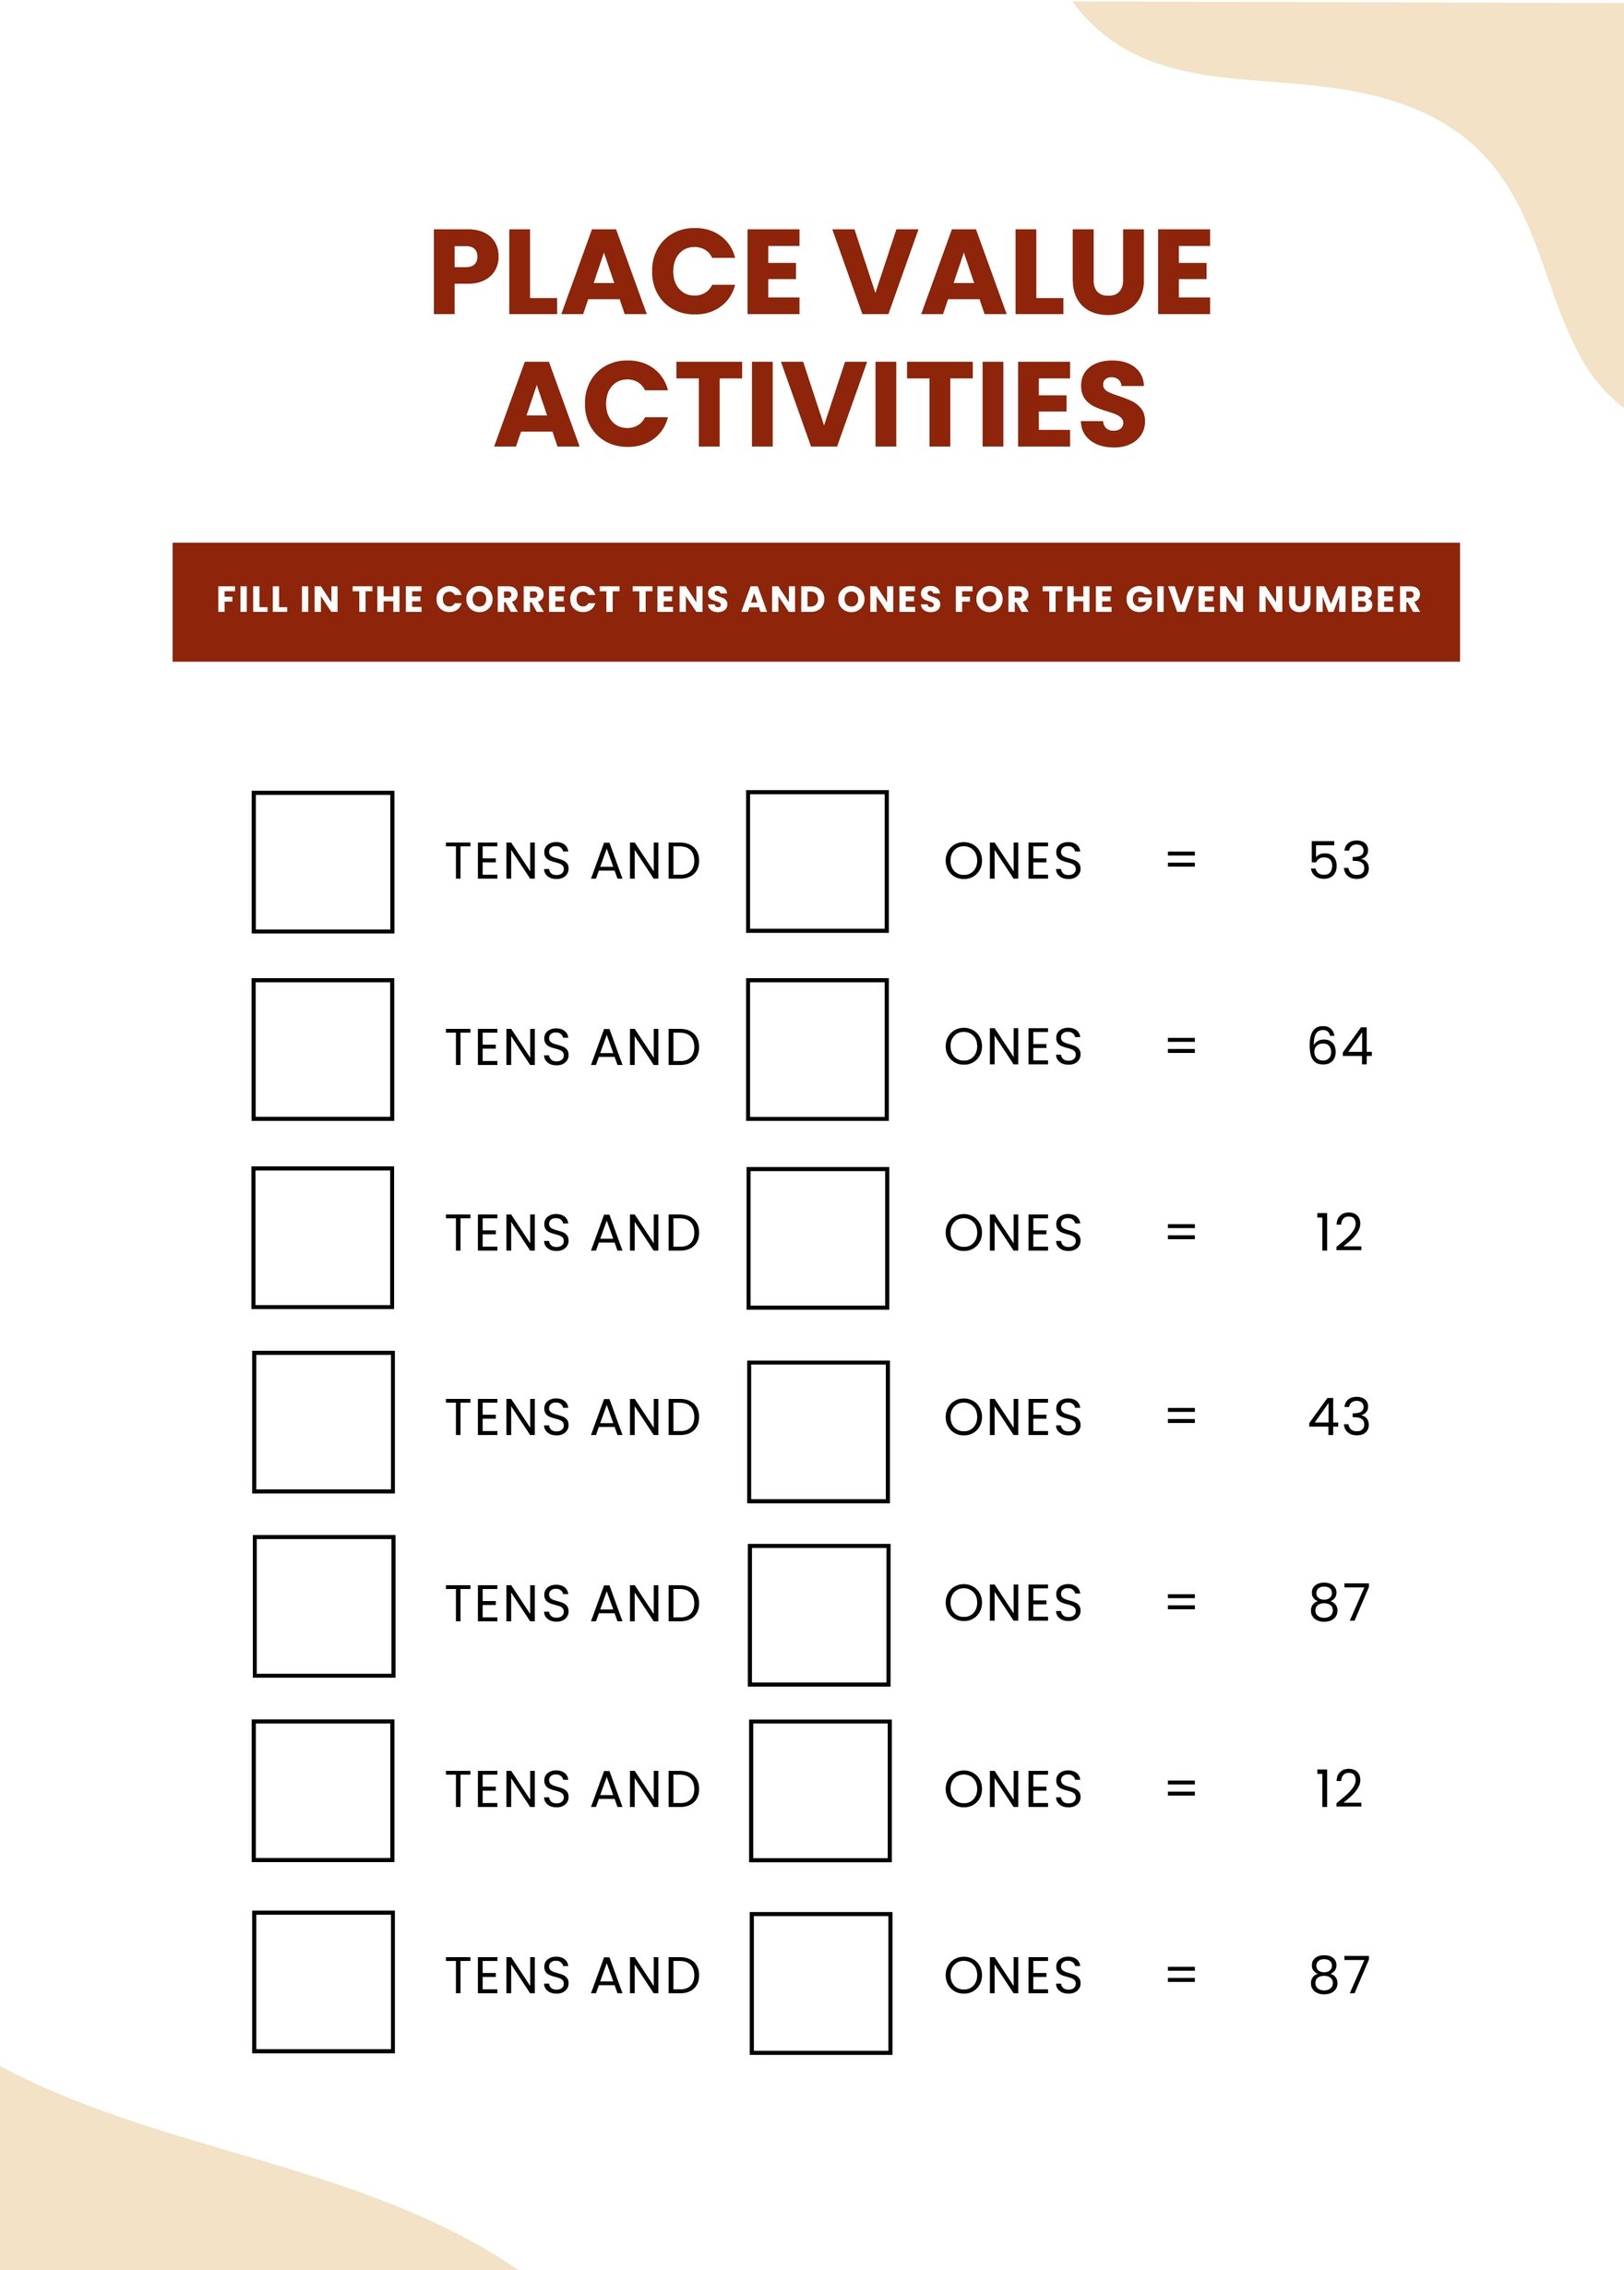 FREE Place Value Template Download in Word, PDF, Illustrator